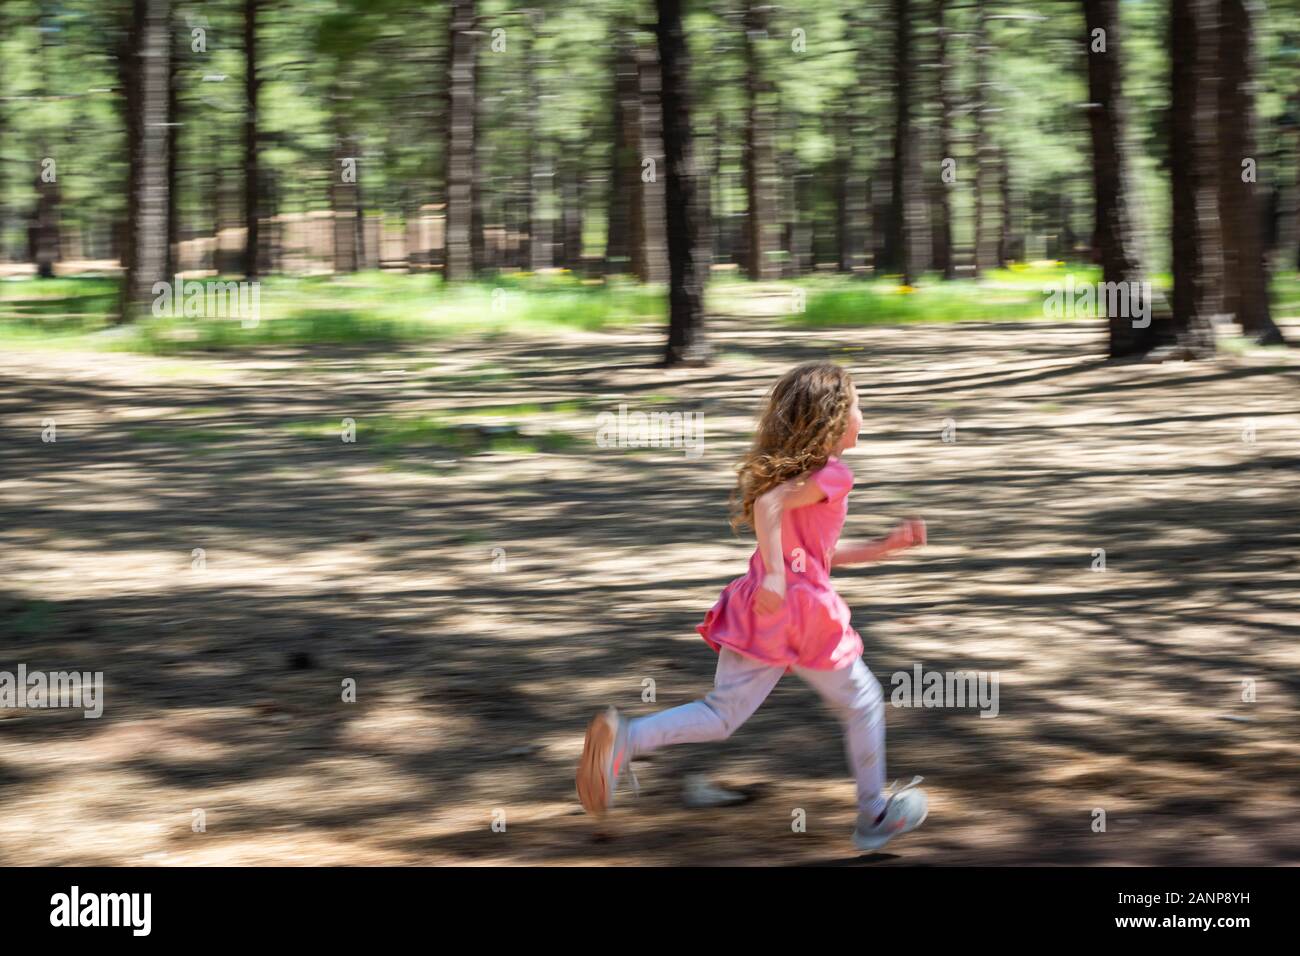 A blond girl wearing a pink outfit runs through the forest on a sunny day. Her curly hair bounces with the wind of her speed. Stock Photo